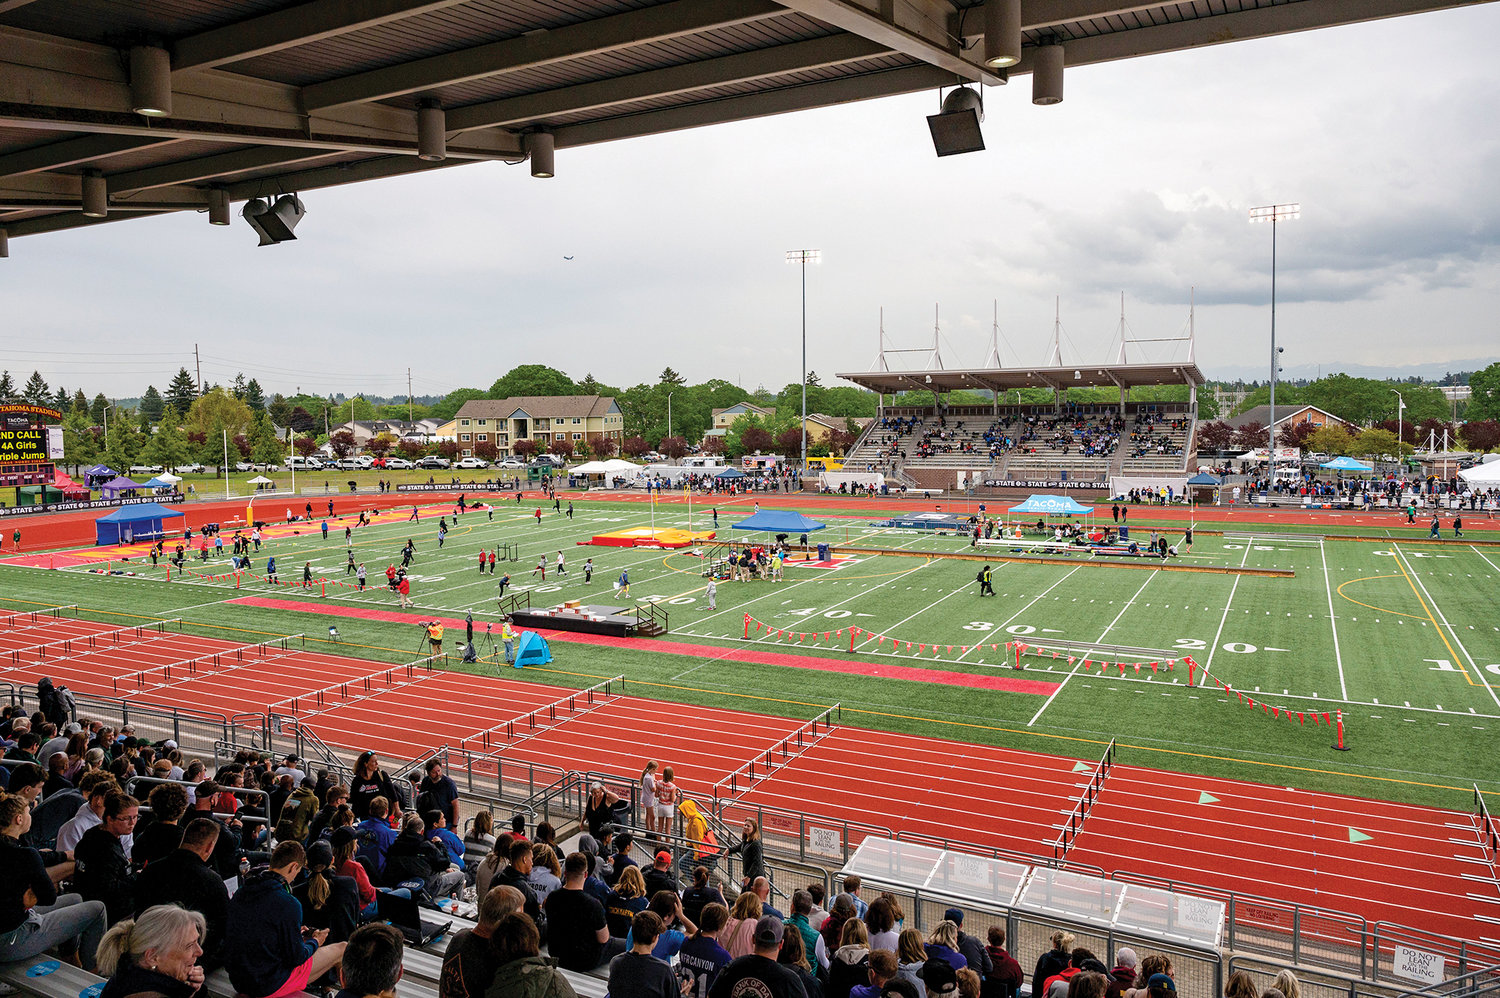 The State 2A, 3A, 4A track and field championships were held on May 26 to May 28 at Mount Tahoma High School in Tacoma.